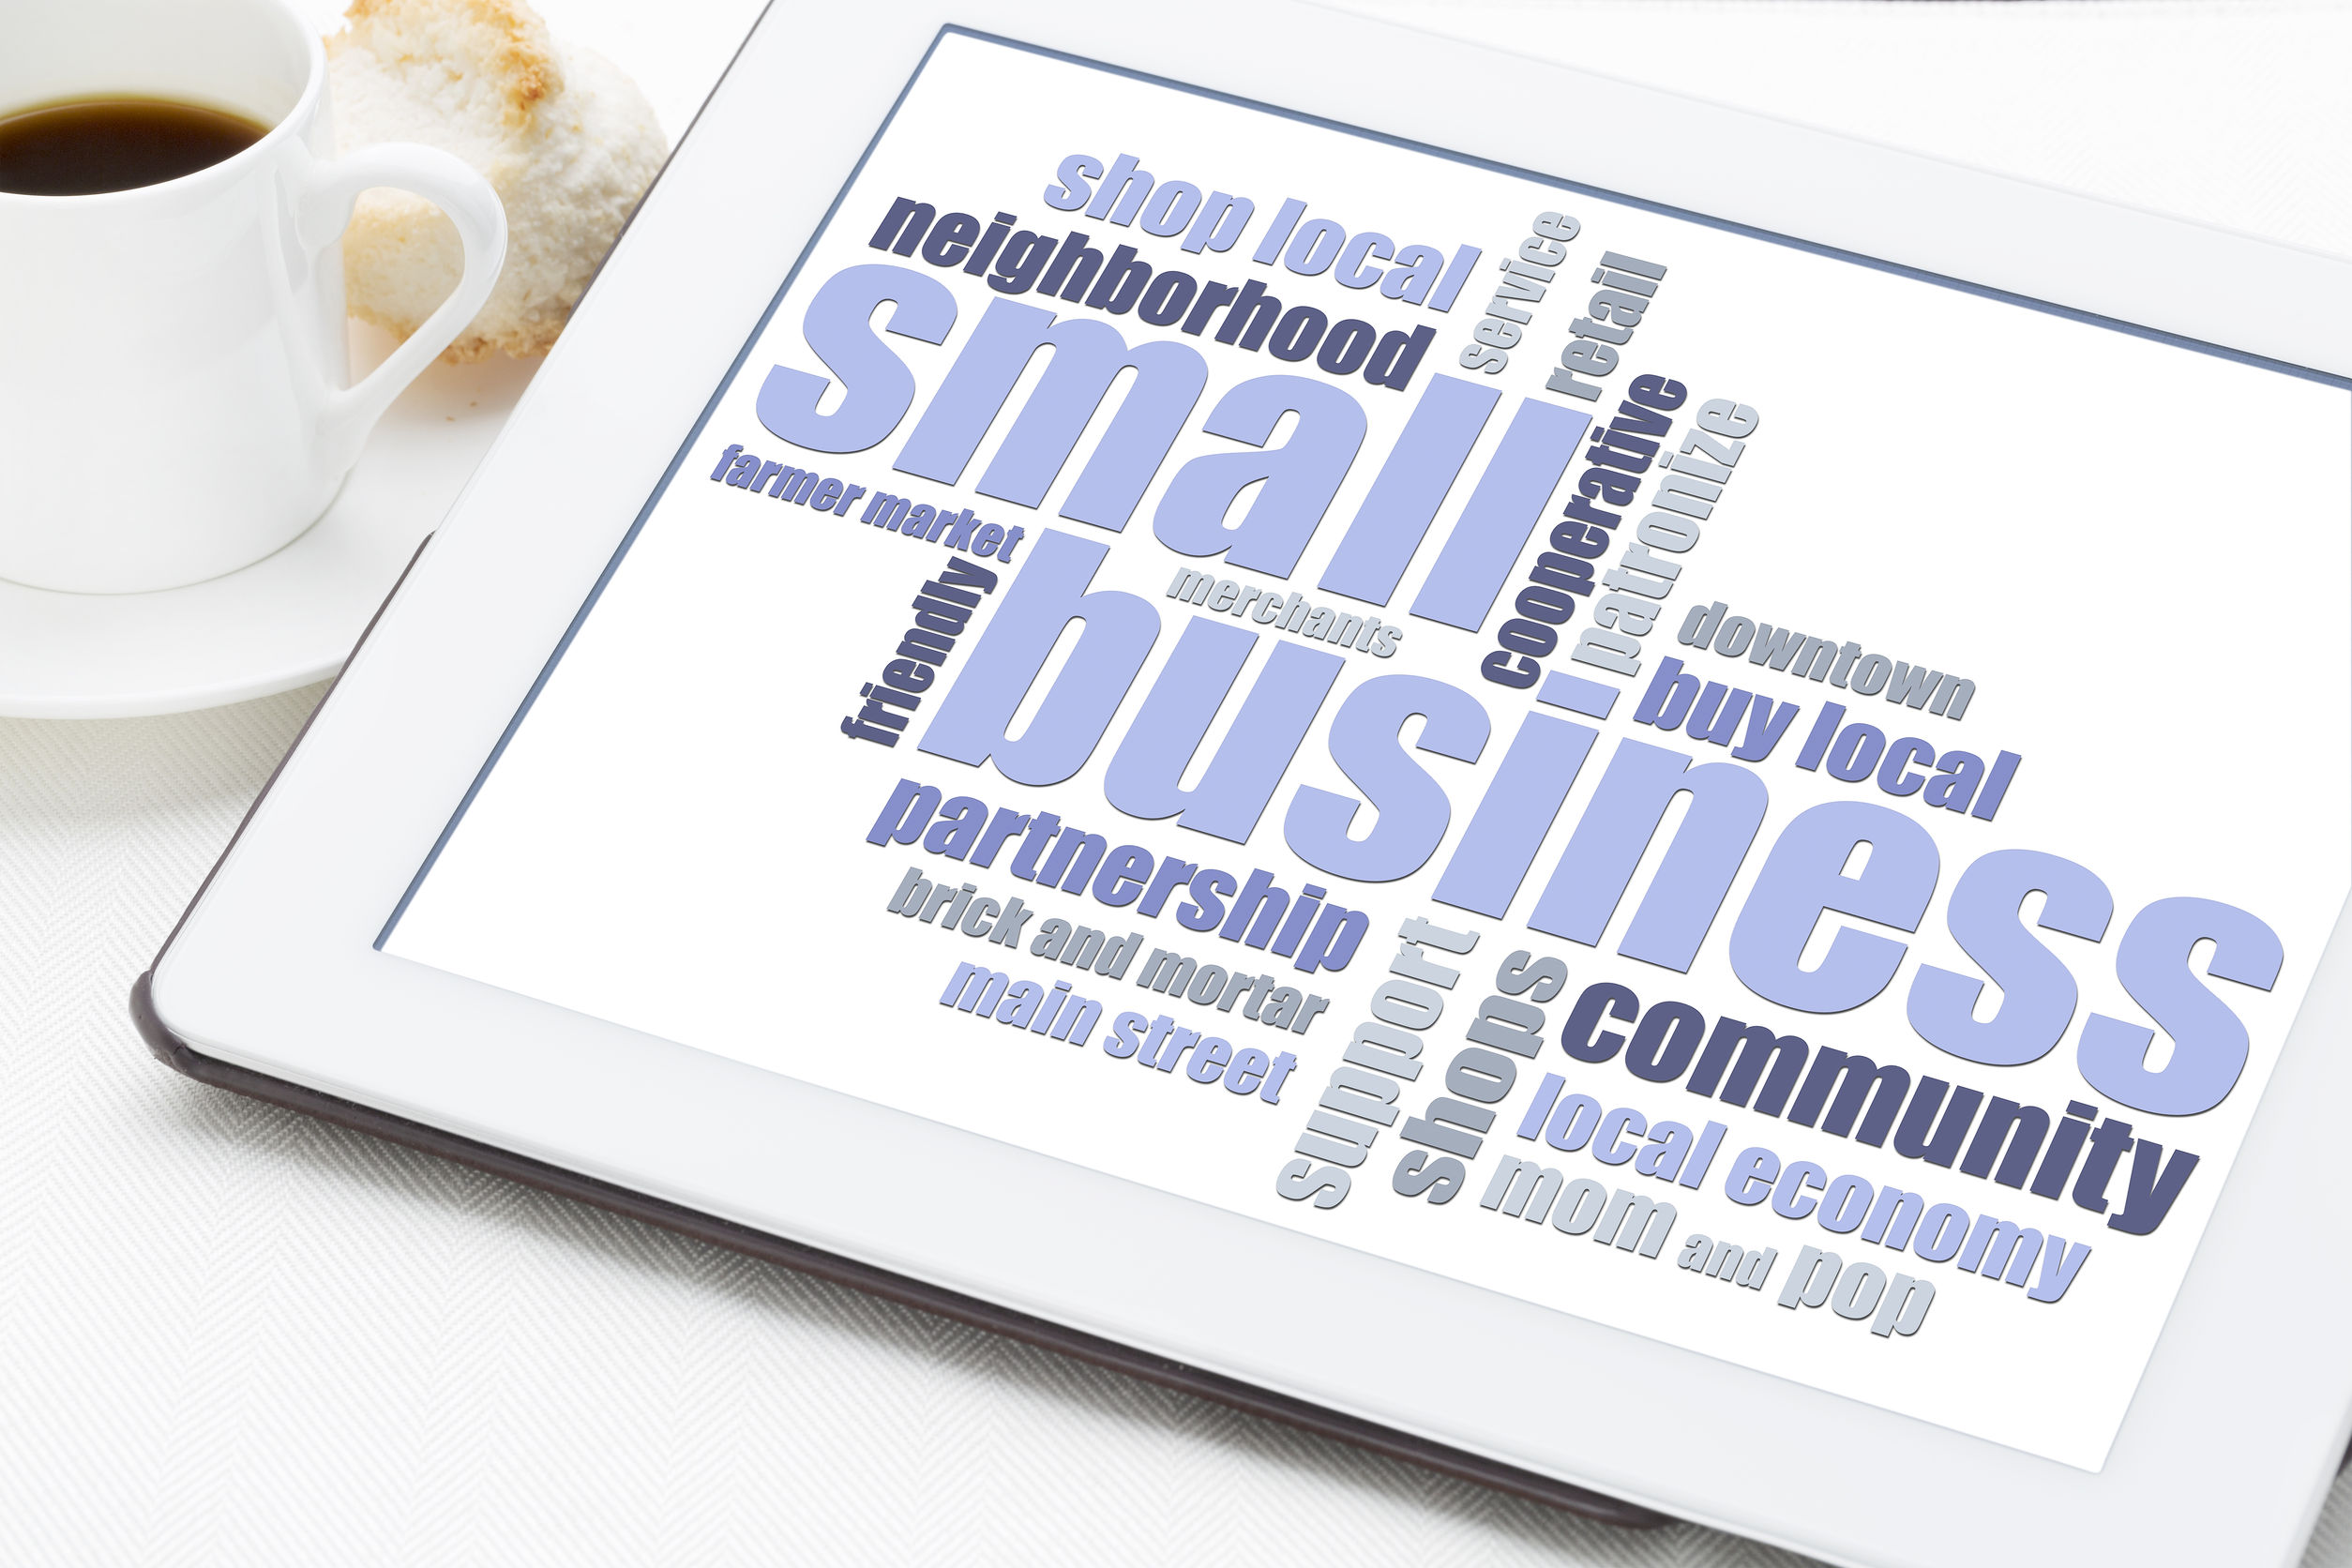 Small Business language on a tablet